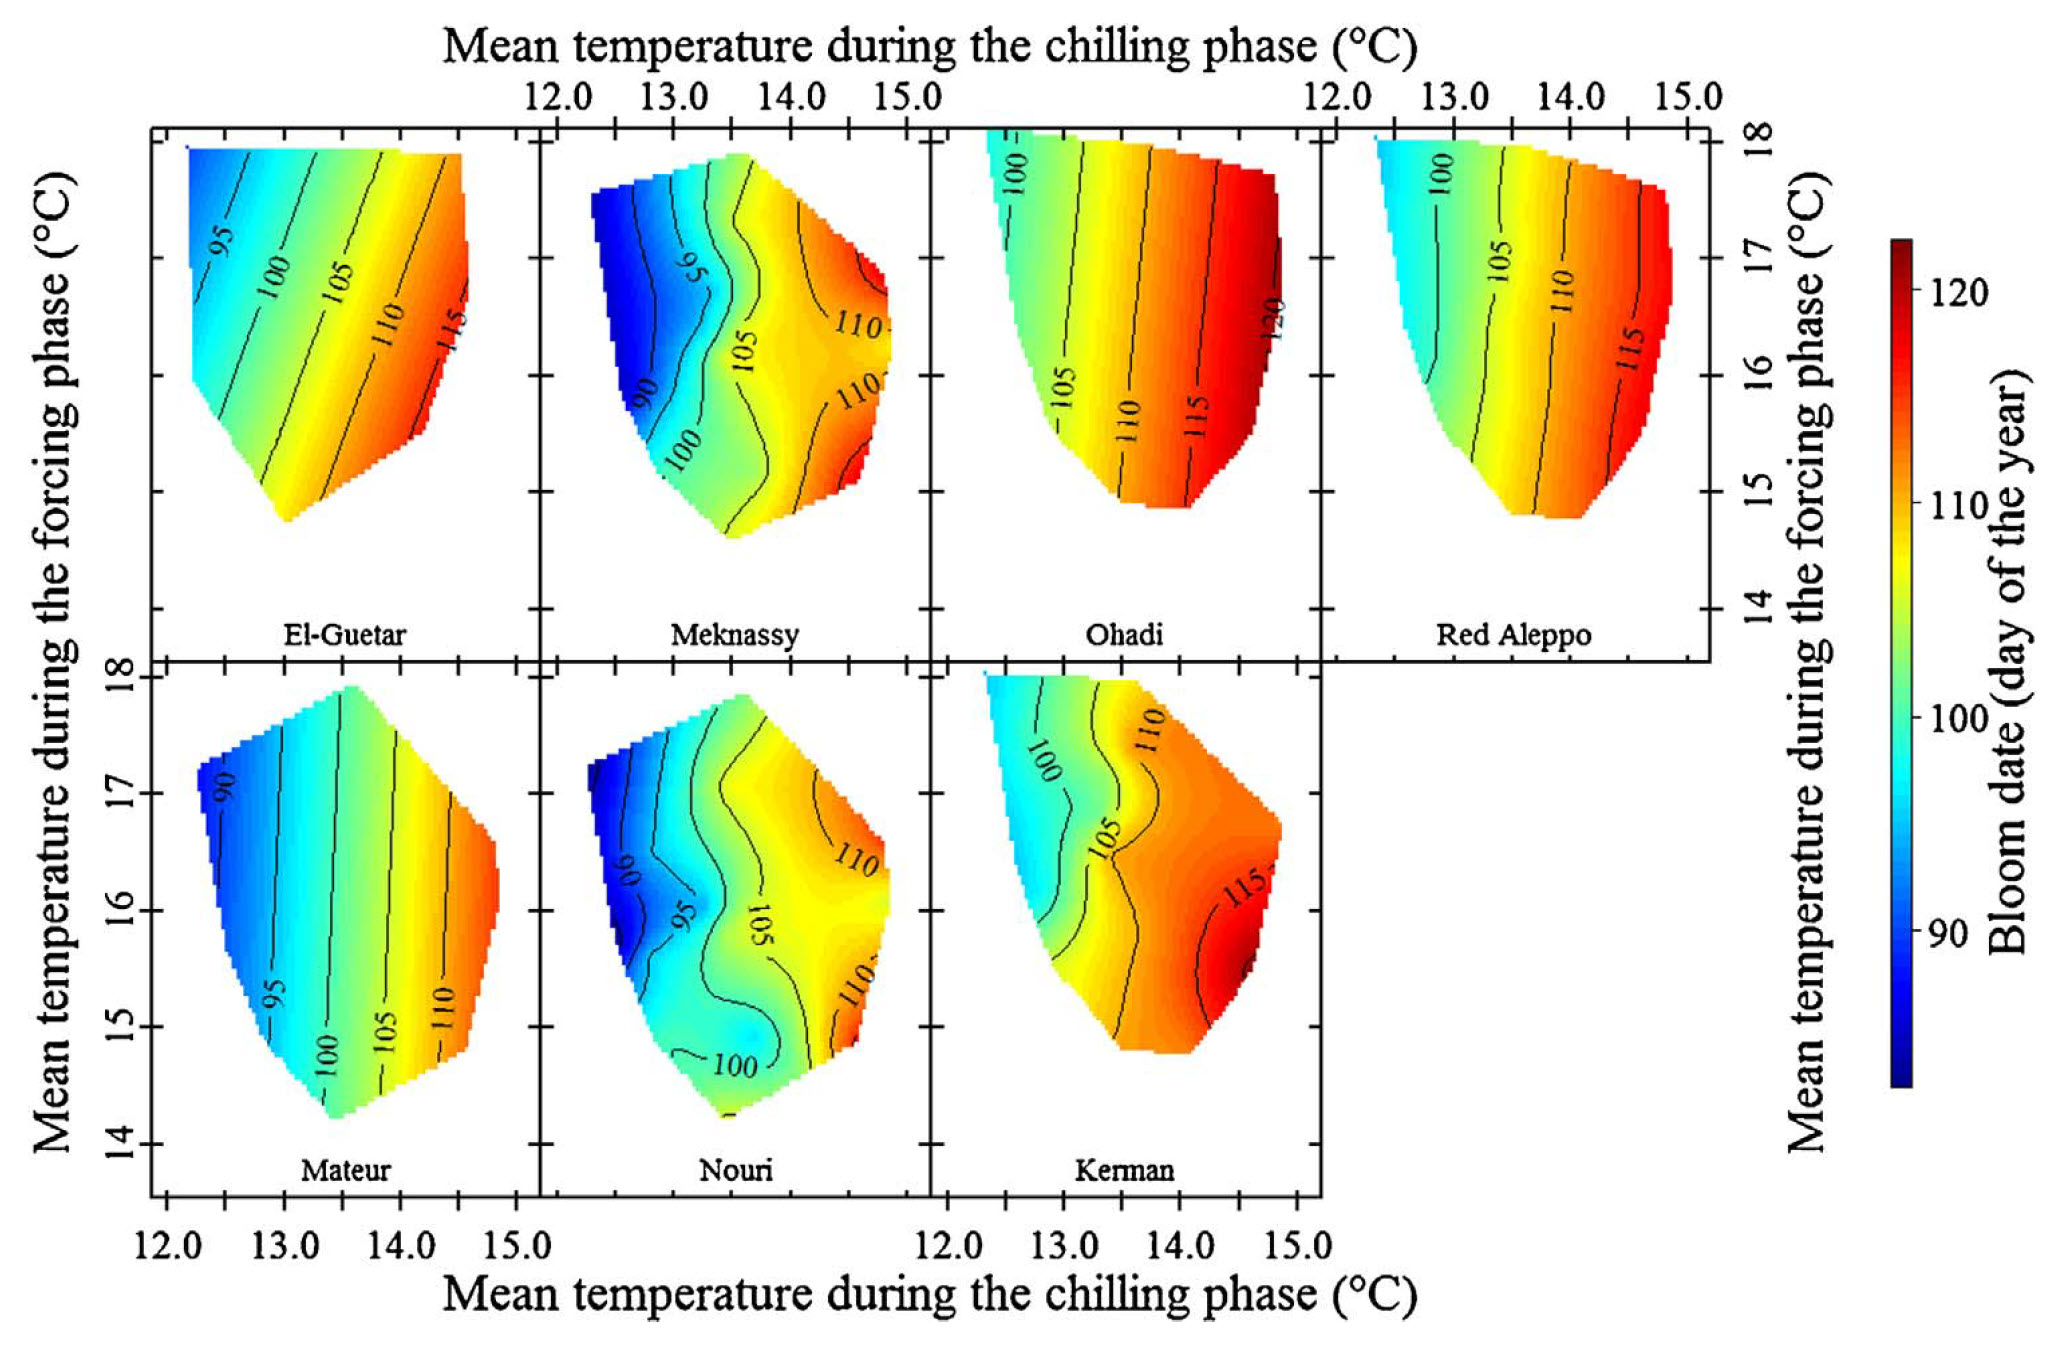 Temperature response of pistachios in Sfax, Tunisia, to temperatures during the chilling and forcing phases (Benmoussa et al., 2017b)